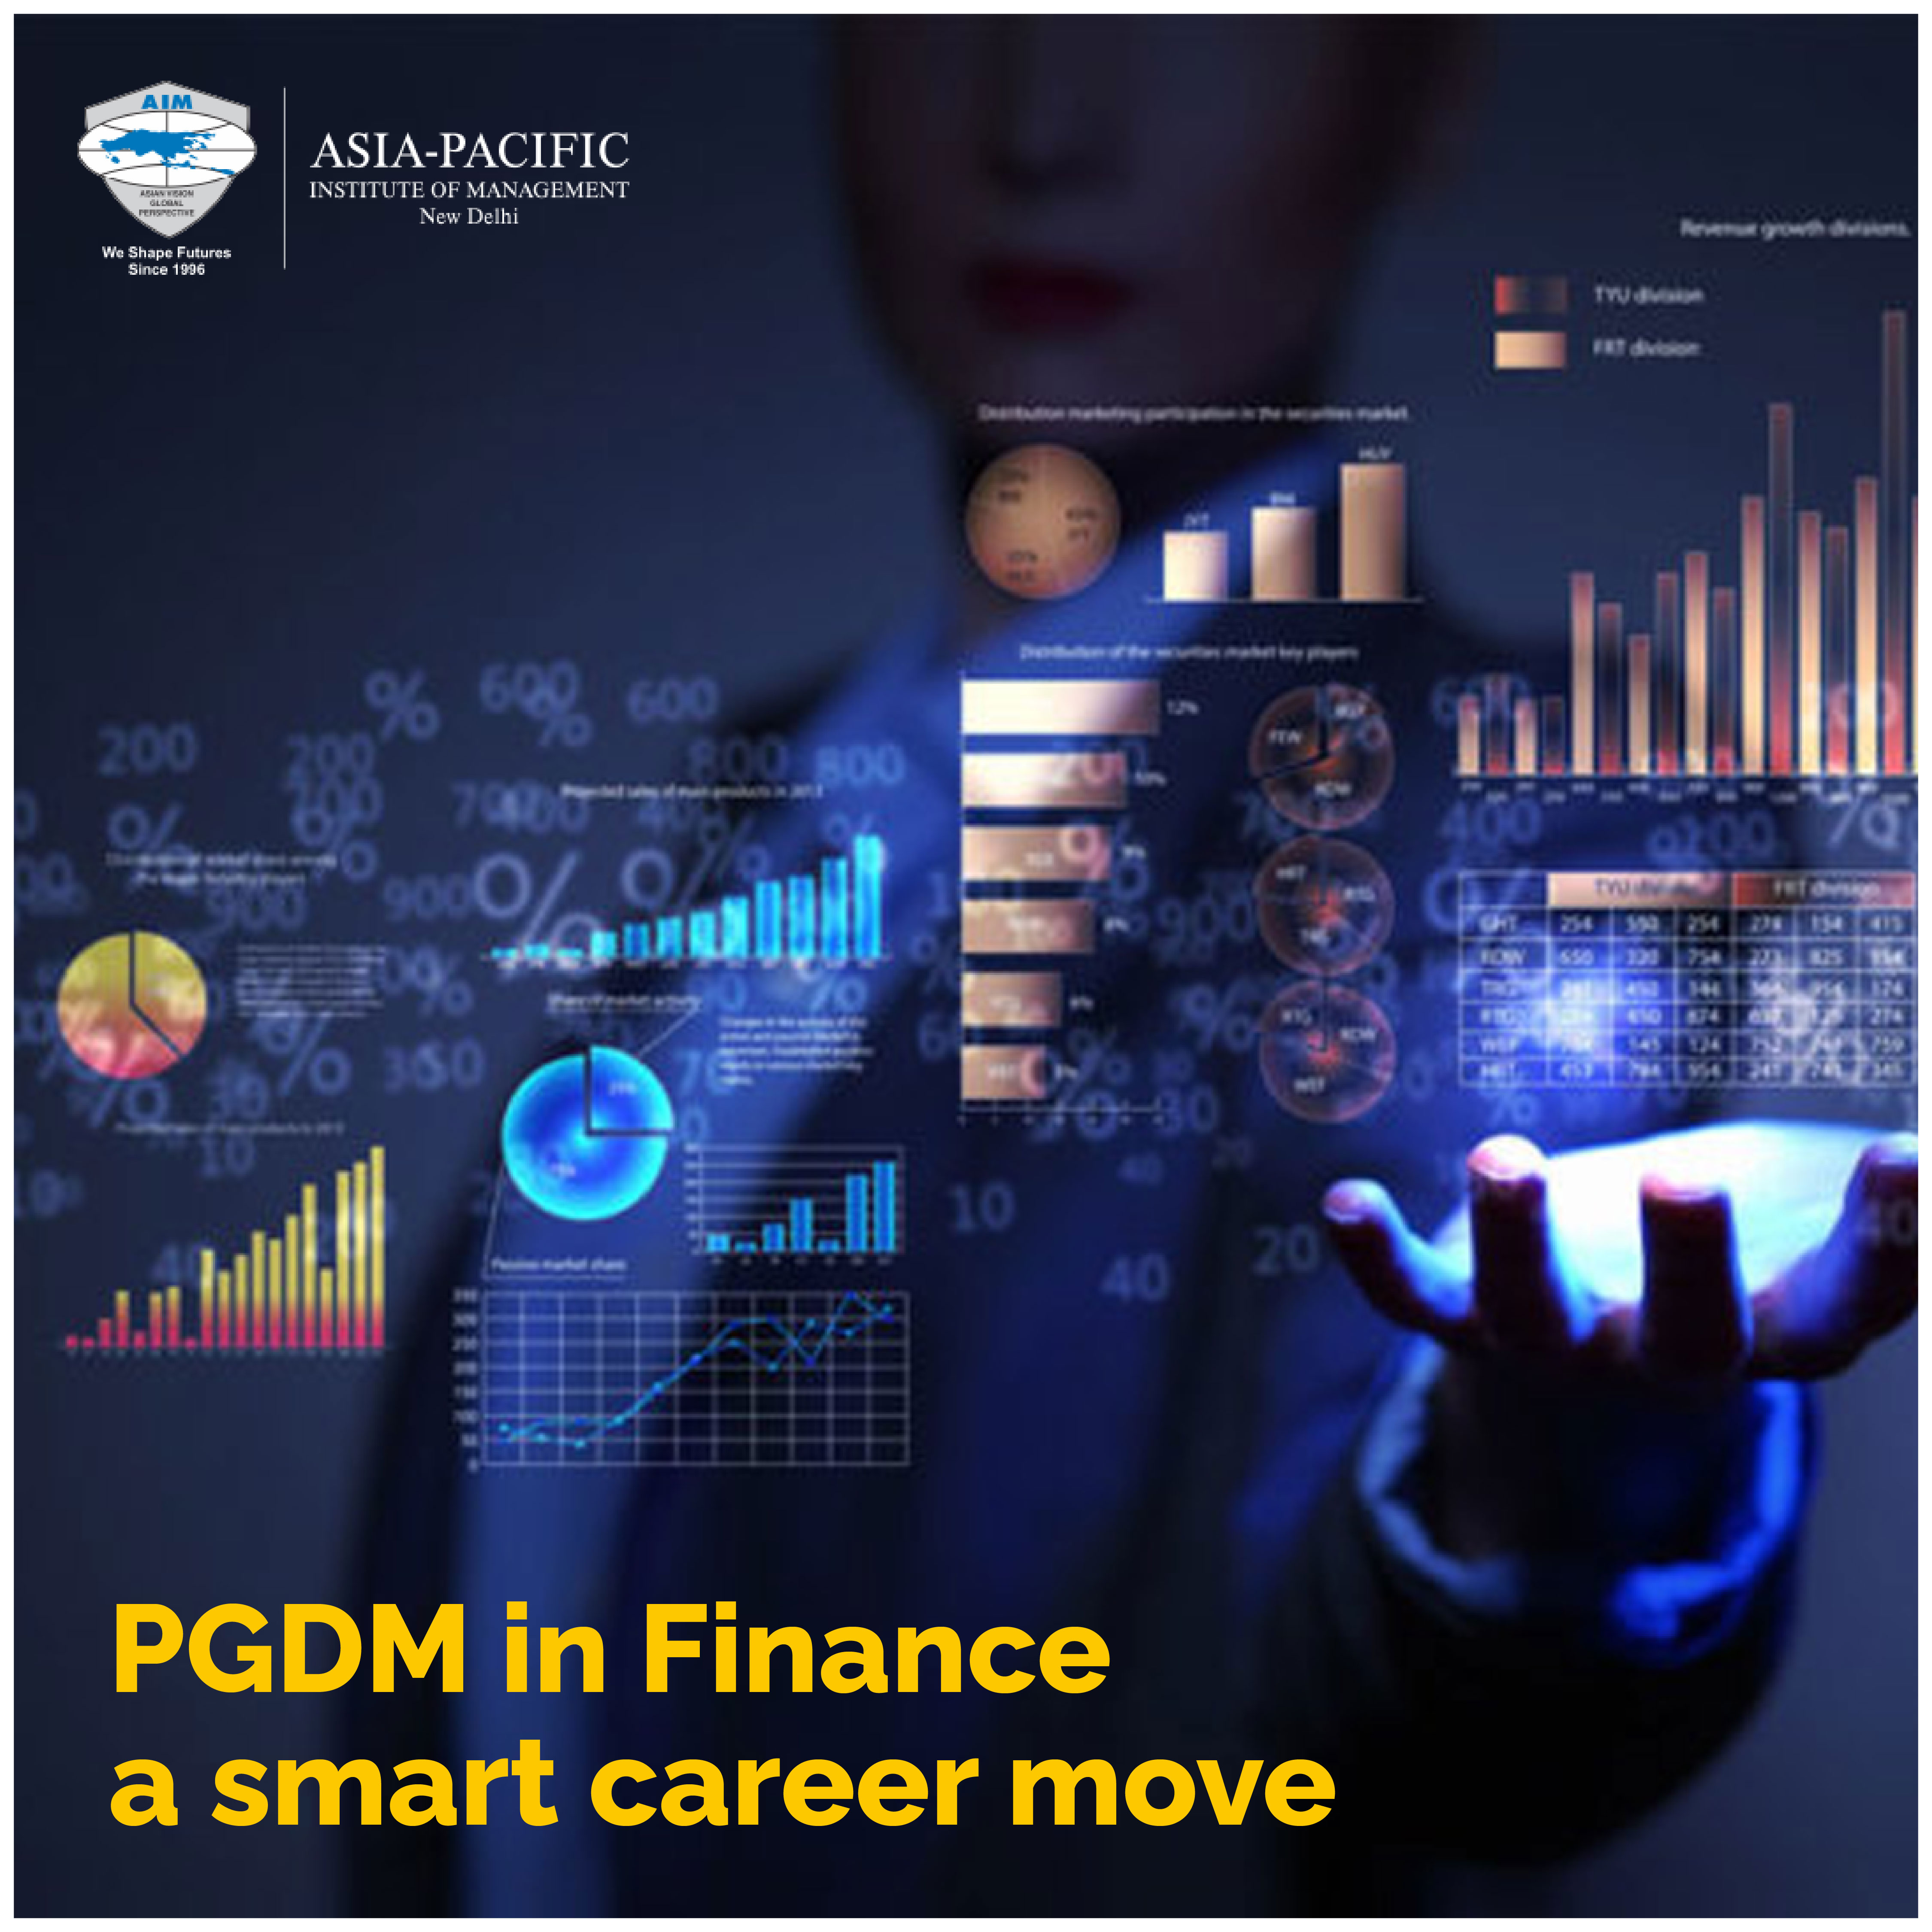 PGDM in Finance a Smart Career Move